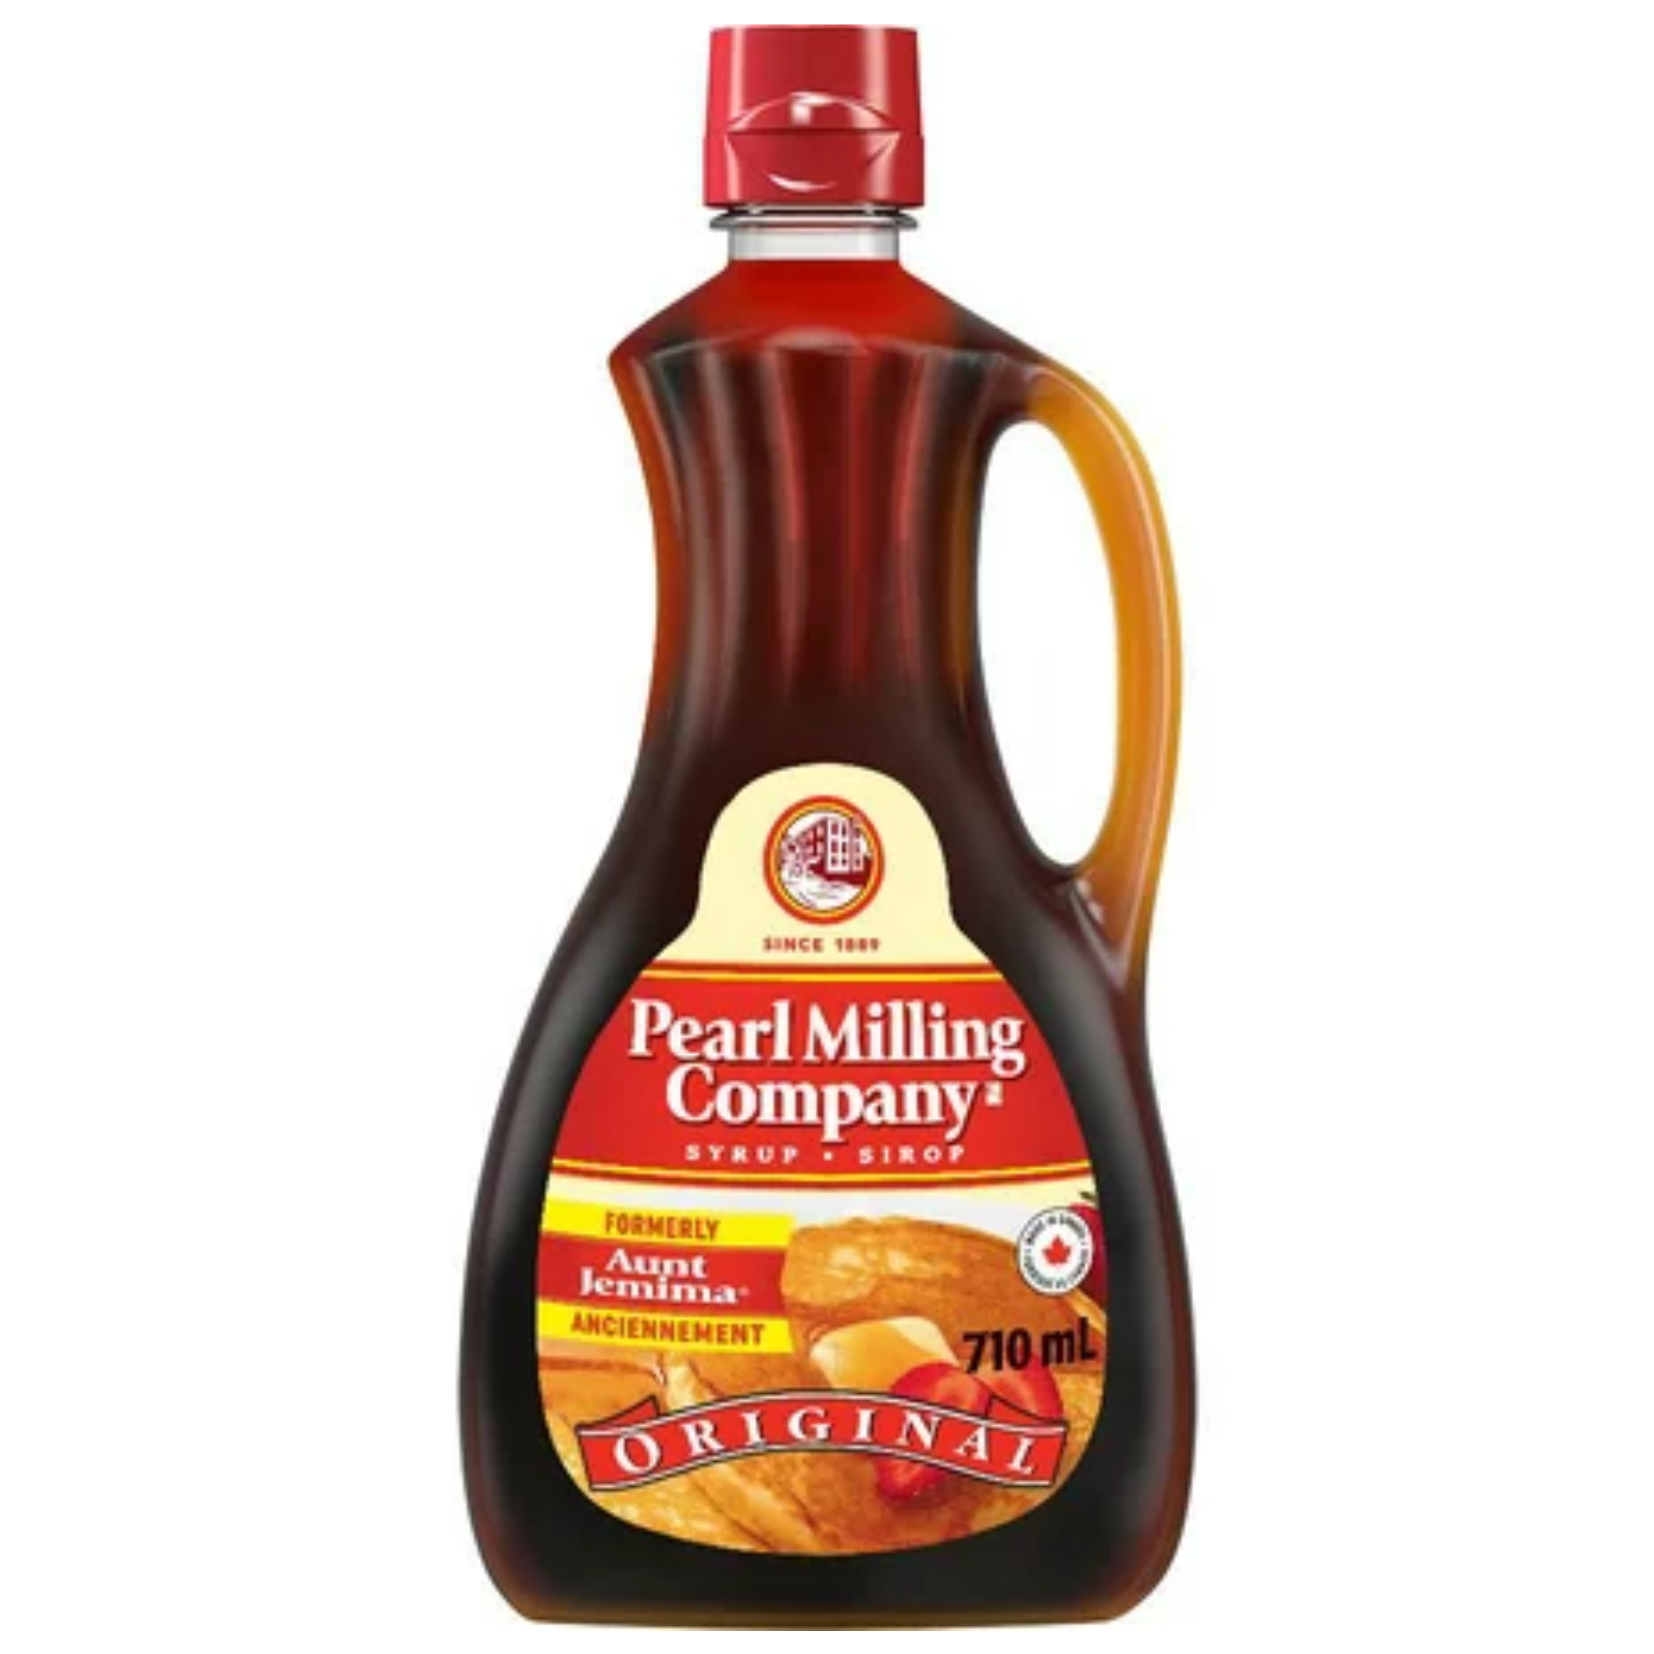 Pearl Milling Company Original Syrup 710ml